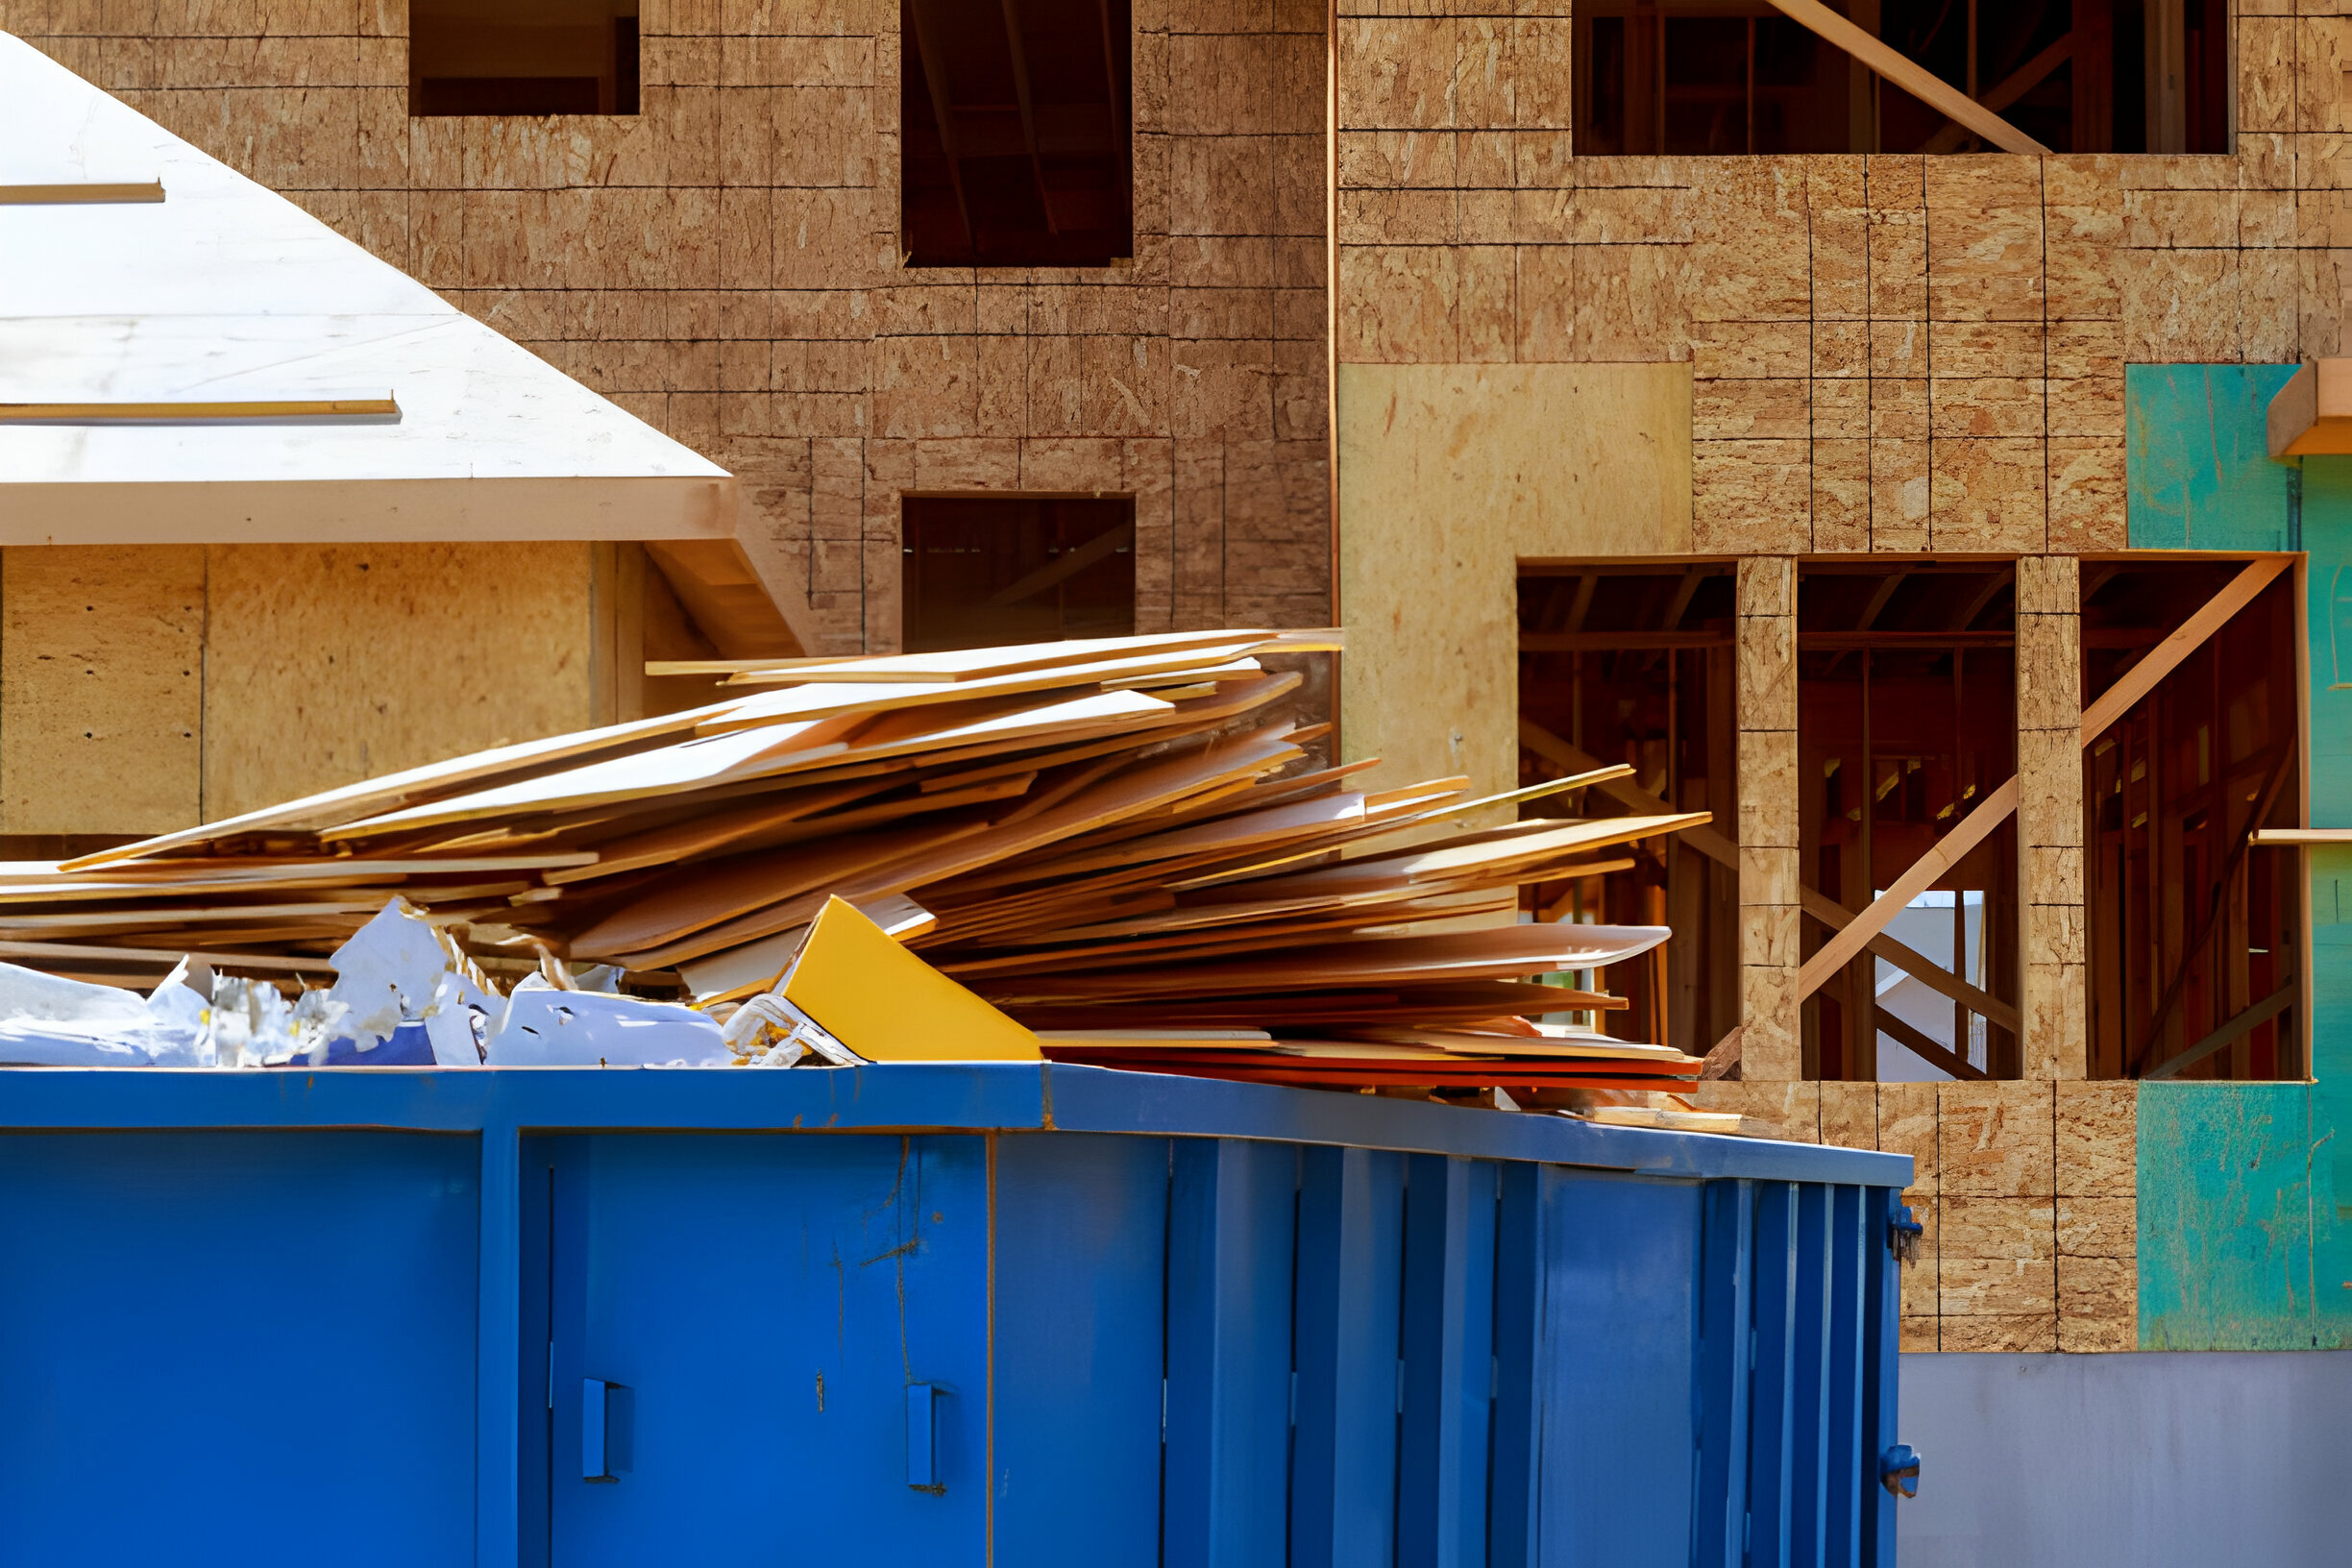 Effective Construction Waste Management in Alabama's Growing Cities